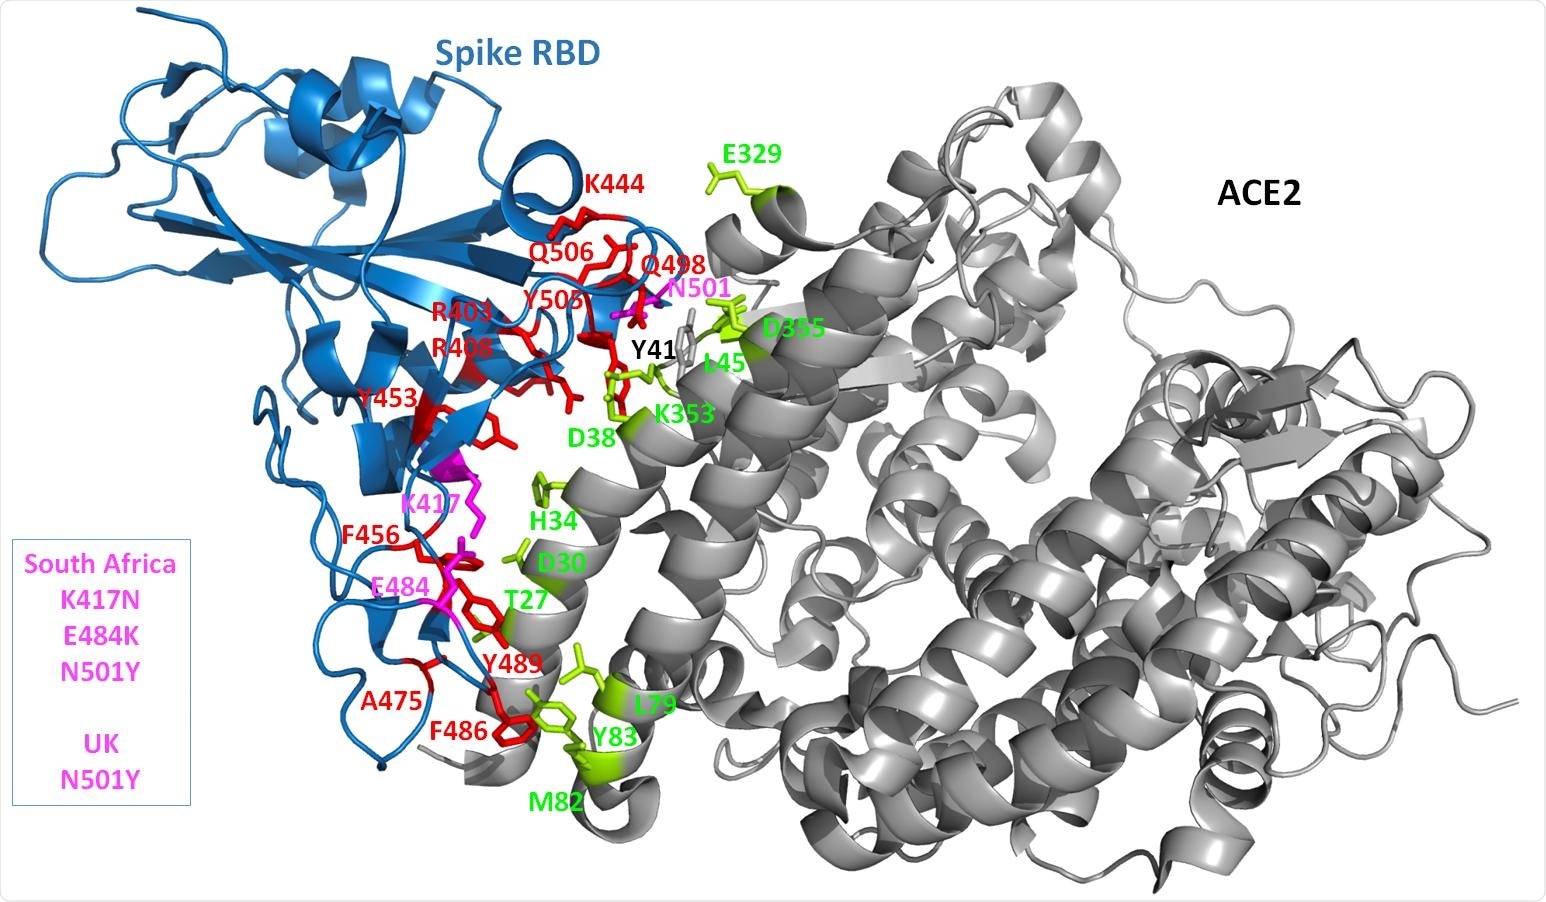 3D structure of the complex. The crystal structure of the Spike RBD and part of the ACE2 receptor interacting with the Spike is shown as cartoon diagram. The Spike domain is in blue while the ACE2 domain is in grey. The Spike side chains of residues predicted to be important (with our in silico protocol, see the Method section) for the interaction with ACE2 are shown in red. The UK and/or South African strains are highlighted by coloring the amino acid changes in this region in magenta. All the Spike side chains shown should have favorable interaction energies with ACE2 but E484 that is predicted to have very weak or unfavorable interactions). On the ACE2 side, the side chains that are predicted to contribute favorably to the interaction with the Spike RBD are shown in lemon. Only ACE Y41 seems to have very limited interactions with the Spike protein while, when the Spike protein carries a Y at position 501, ACE2 Y41 has then some favorable interaction energy values with the Spike.